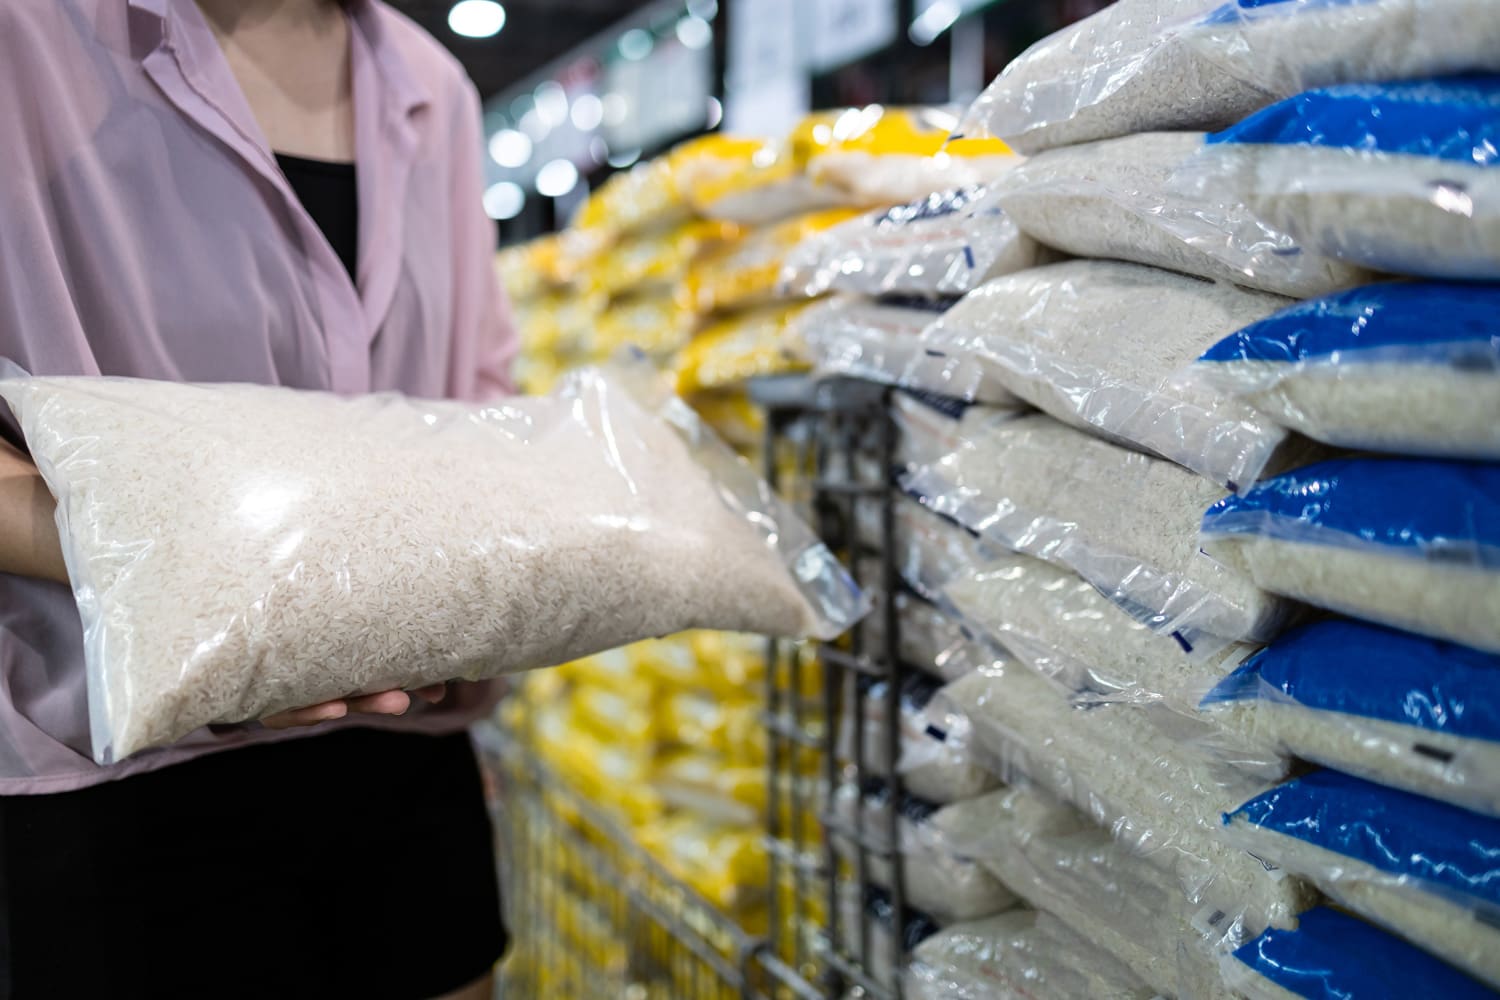 Close up of hands,Asian female consumer holding white rice,shopping dry food,girl buying jasmine rice in transparent plastic bag,choose raw rice products packed for sell at supermarket,food nutrition